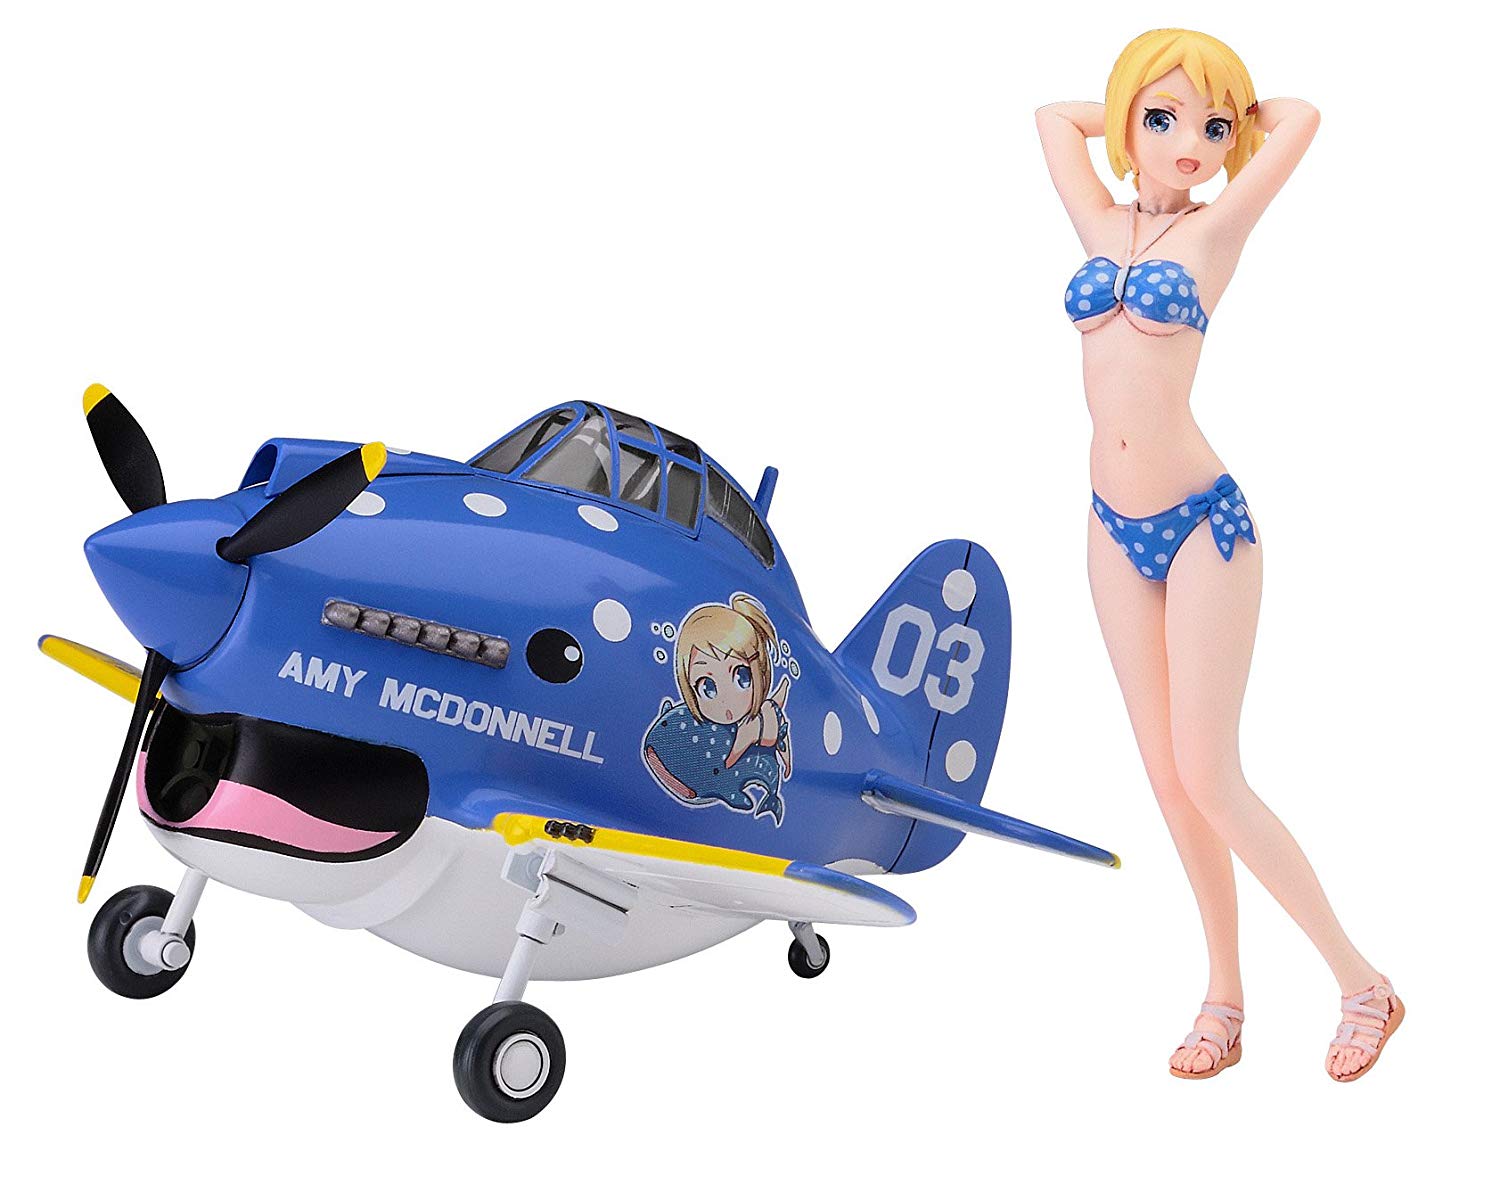 Egg Girls Collection No.03 Amy McDonnell w/Egg Plane P-40 War